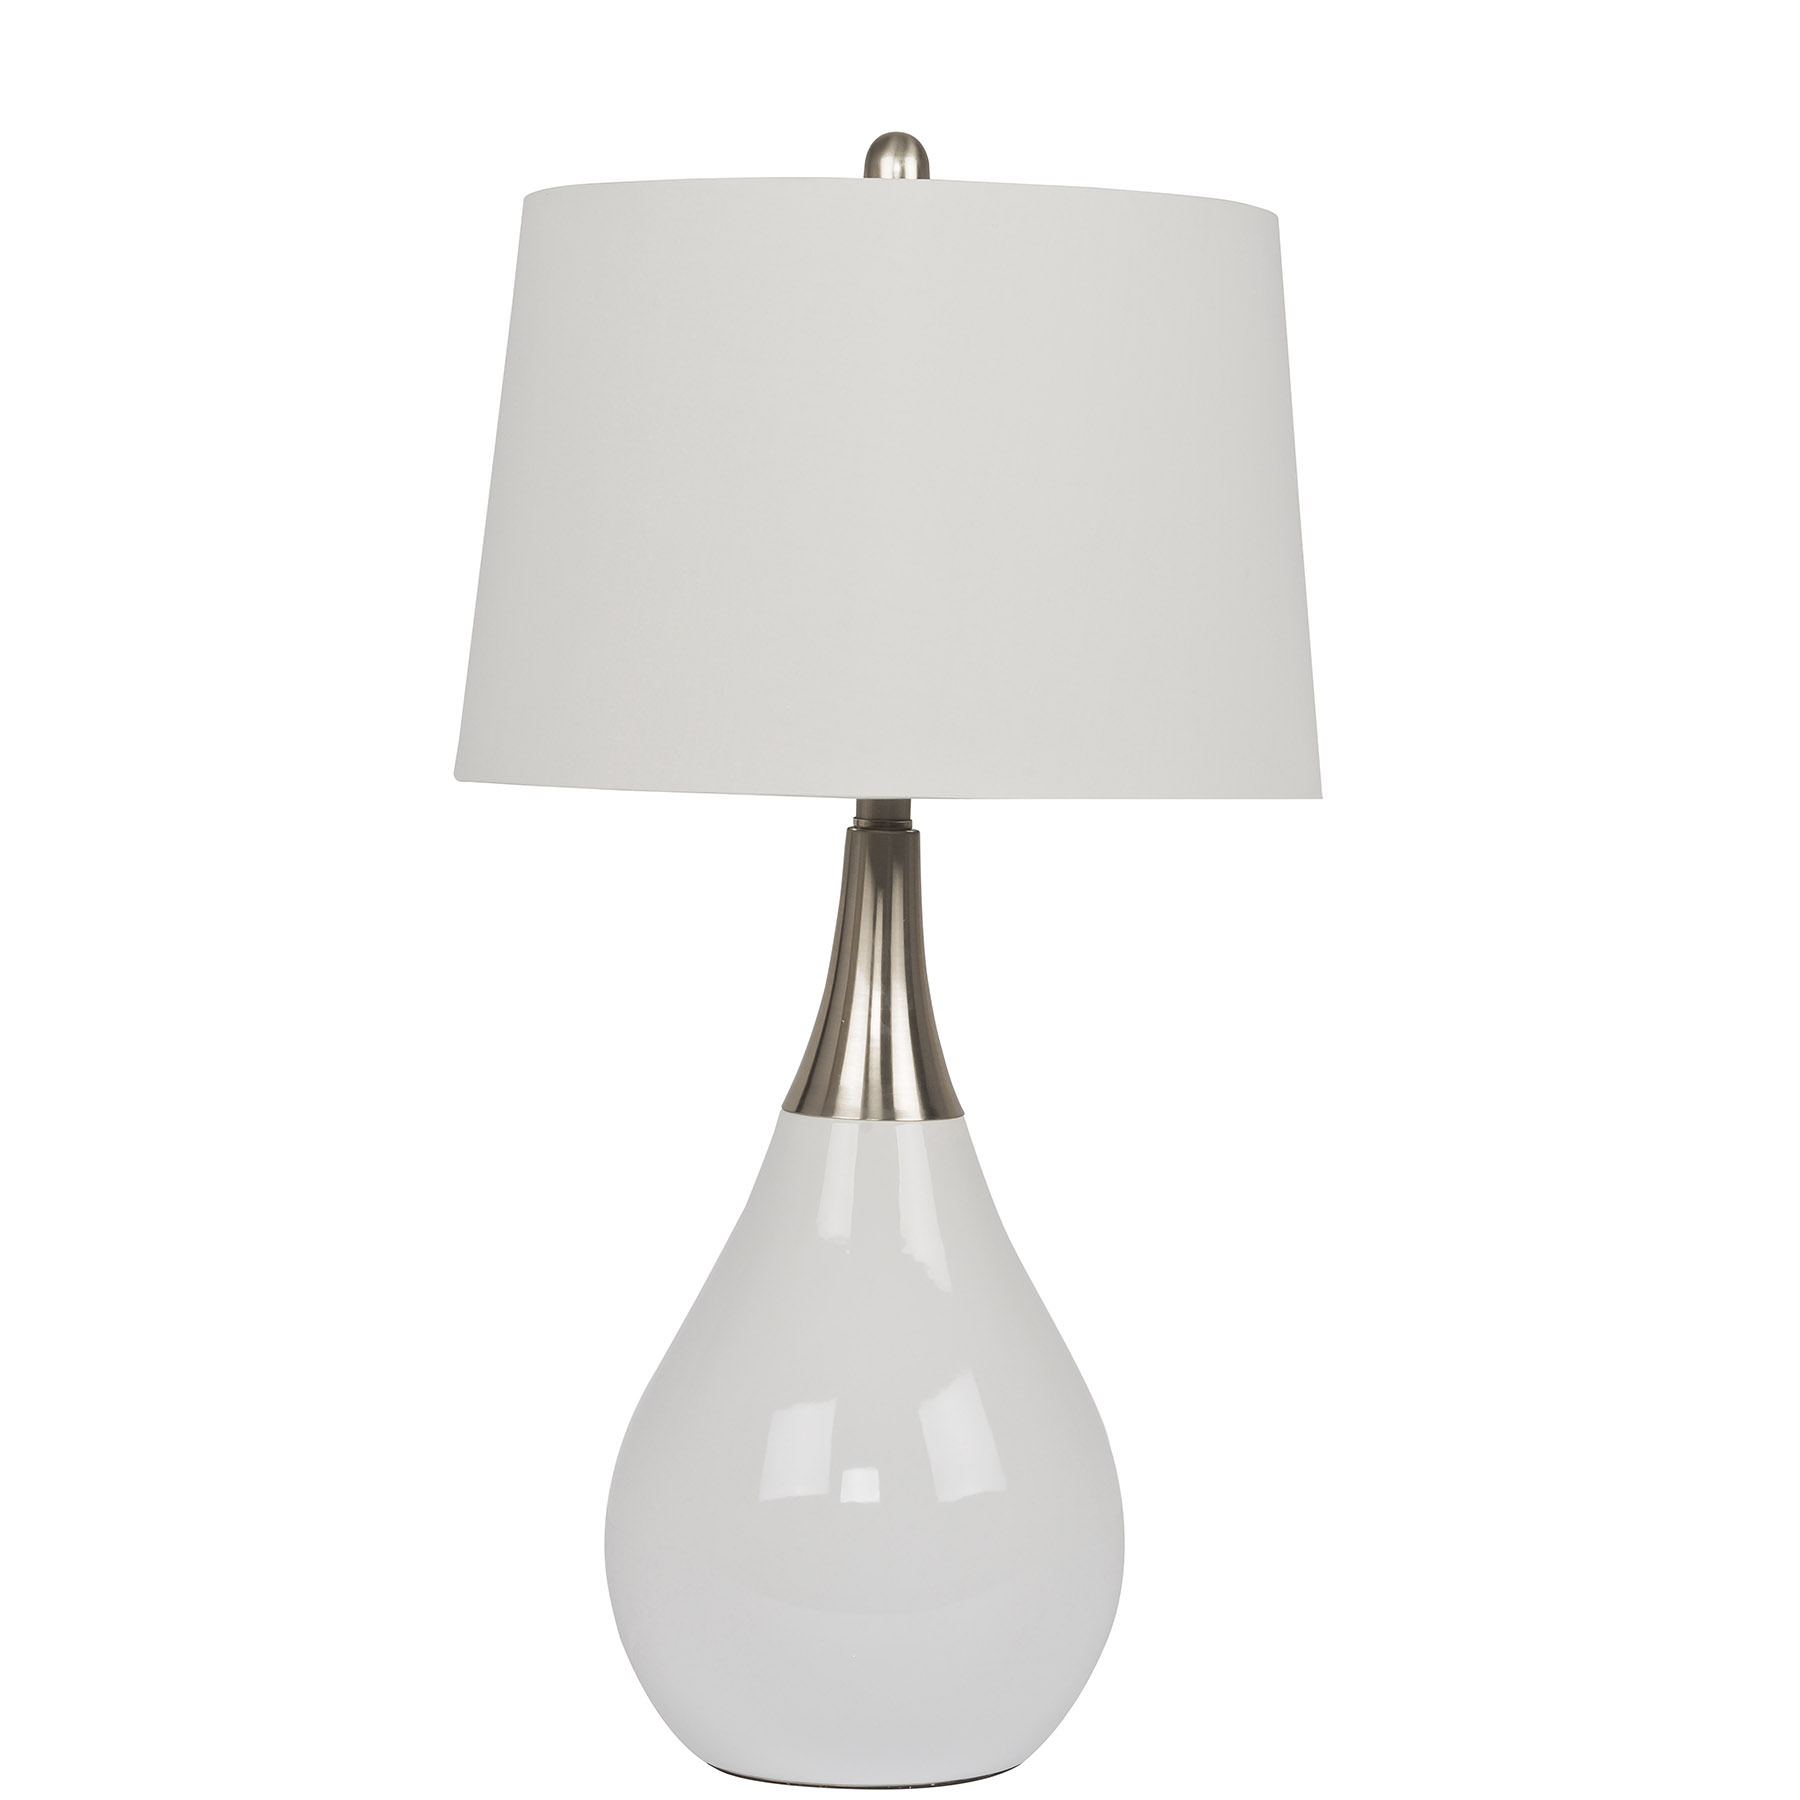 Craftmade 86221 1 Light Metal/Poly Base Table Lamp in Gloss White / Brushed Polished Nickel